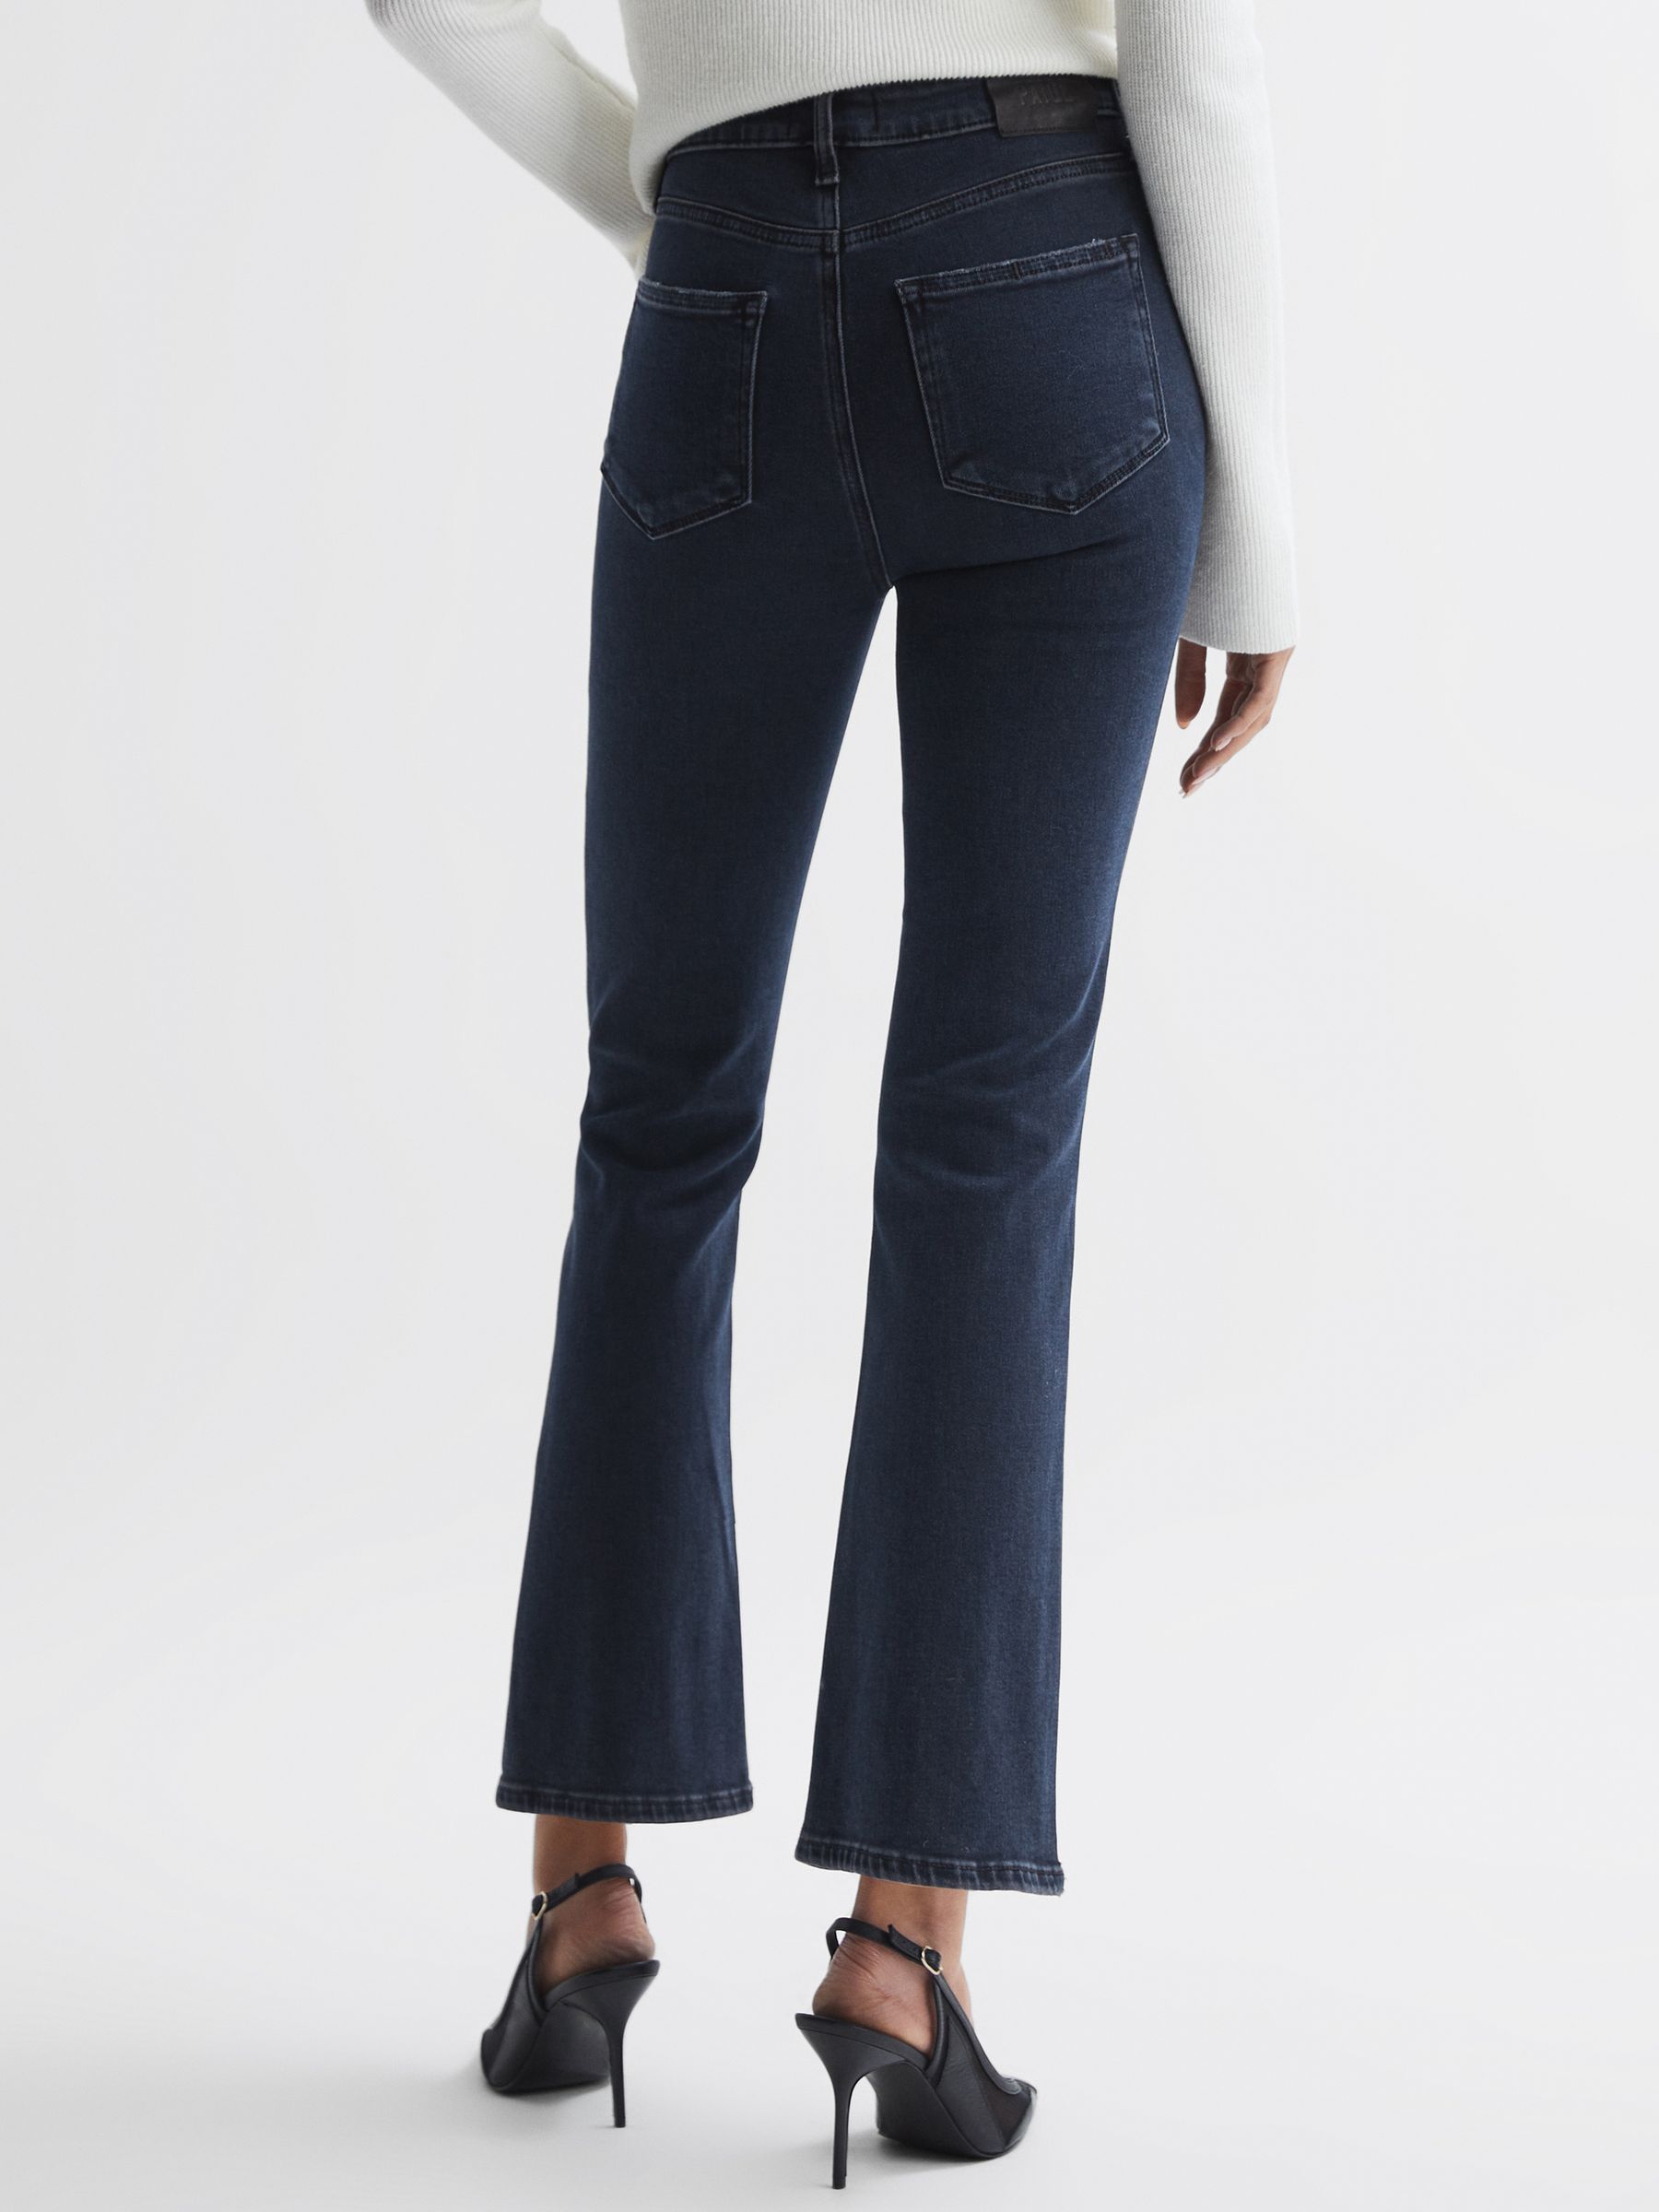 Reiss Claudine Paige High Rise Flared Jeans - REISS